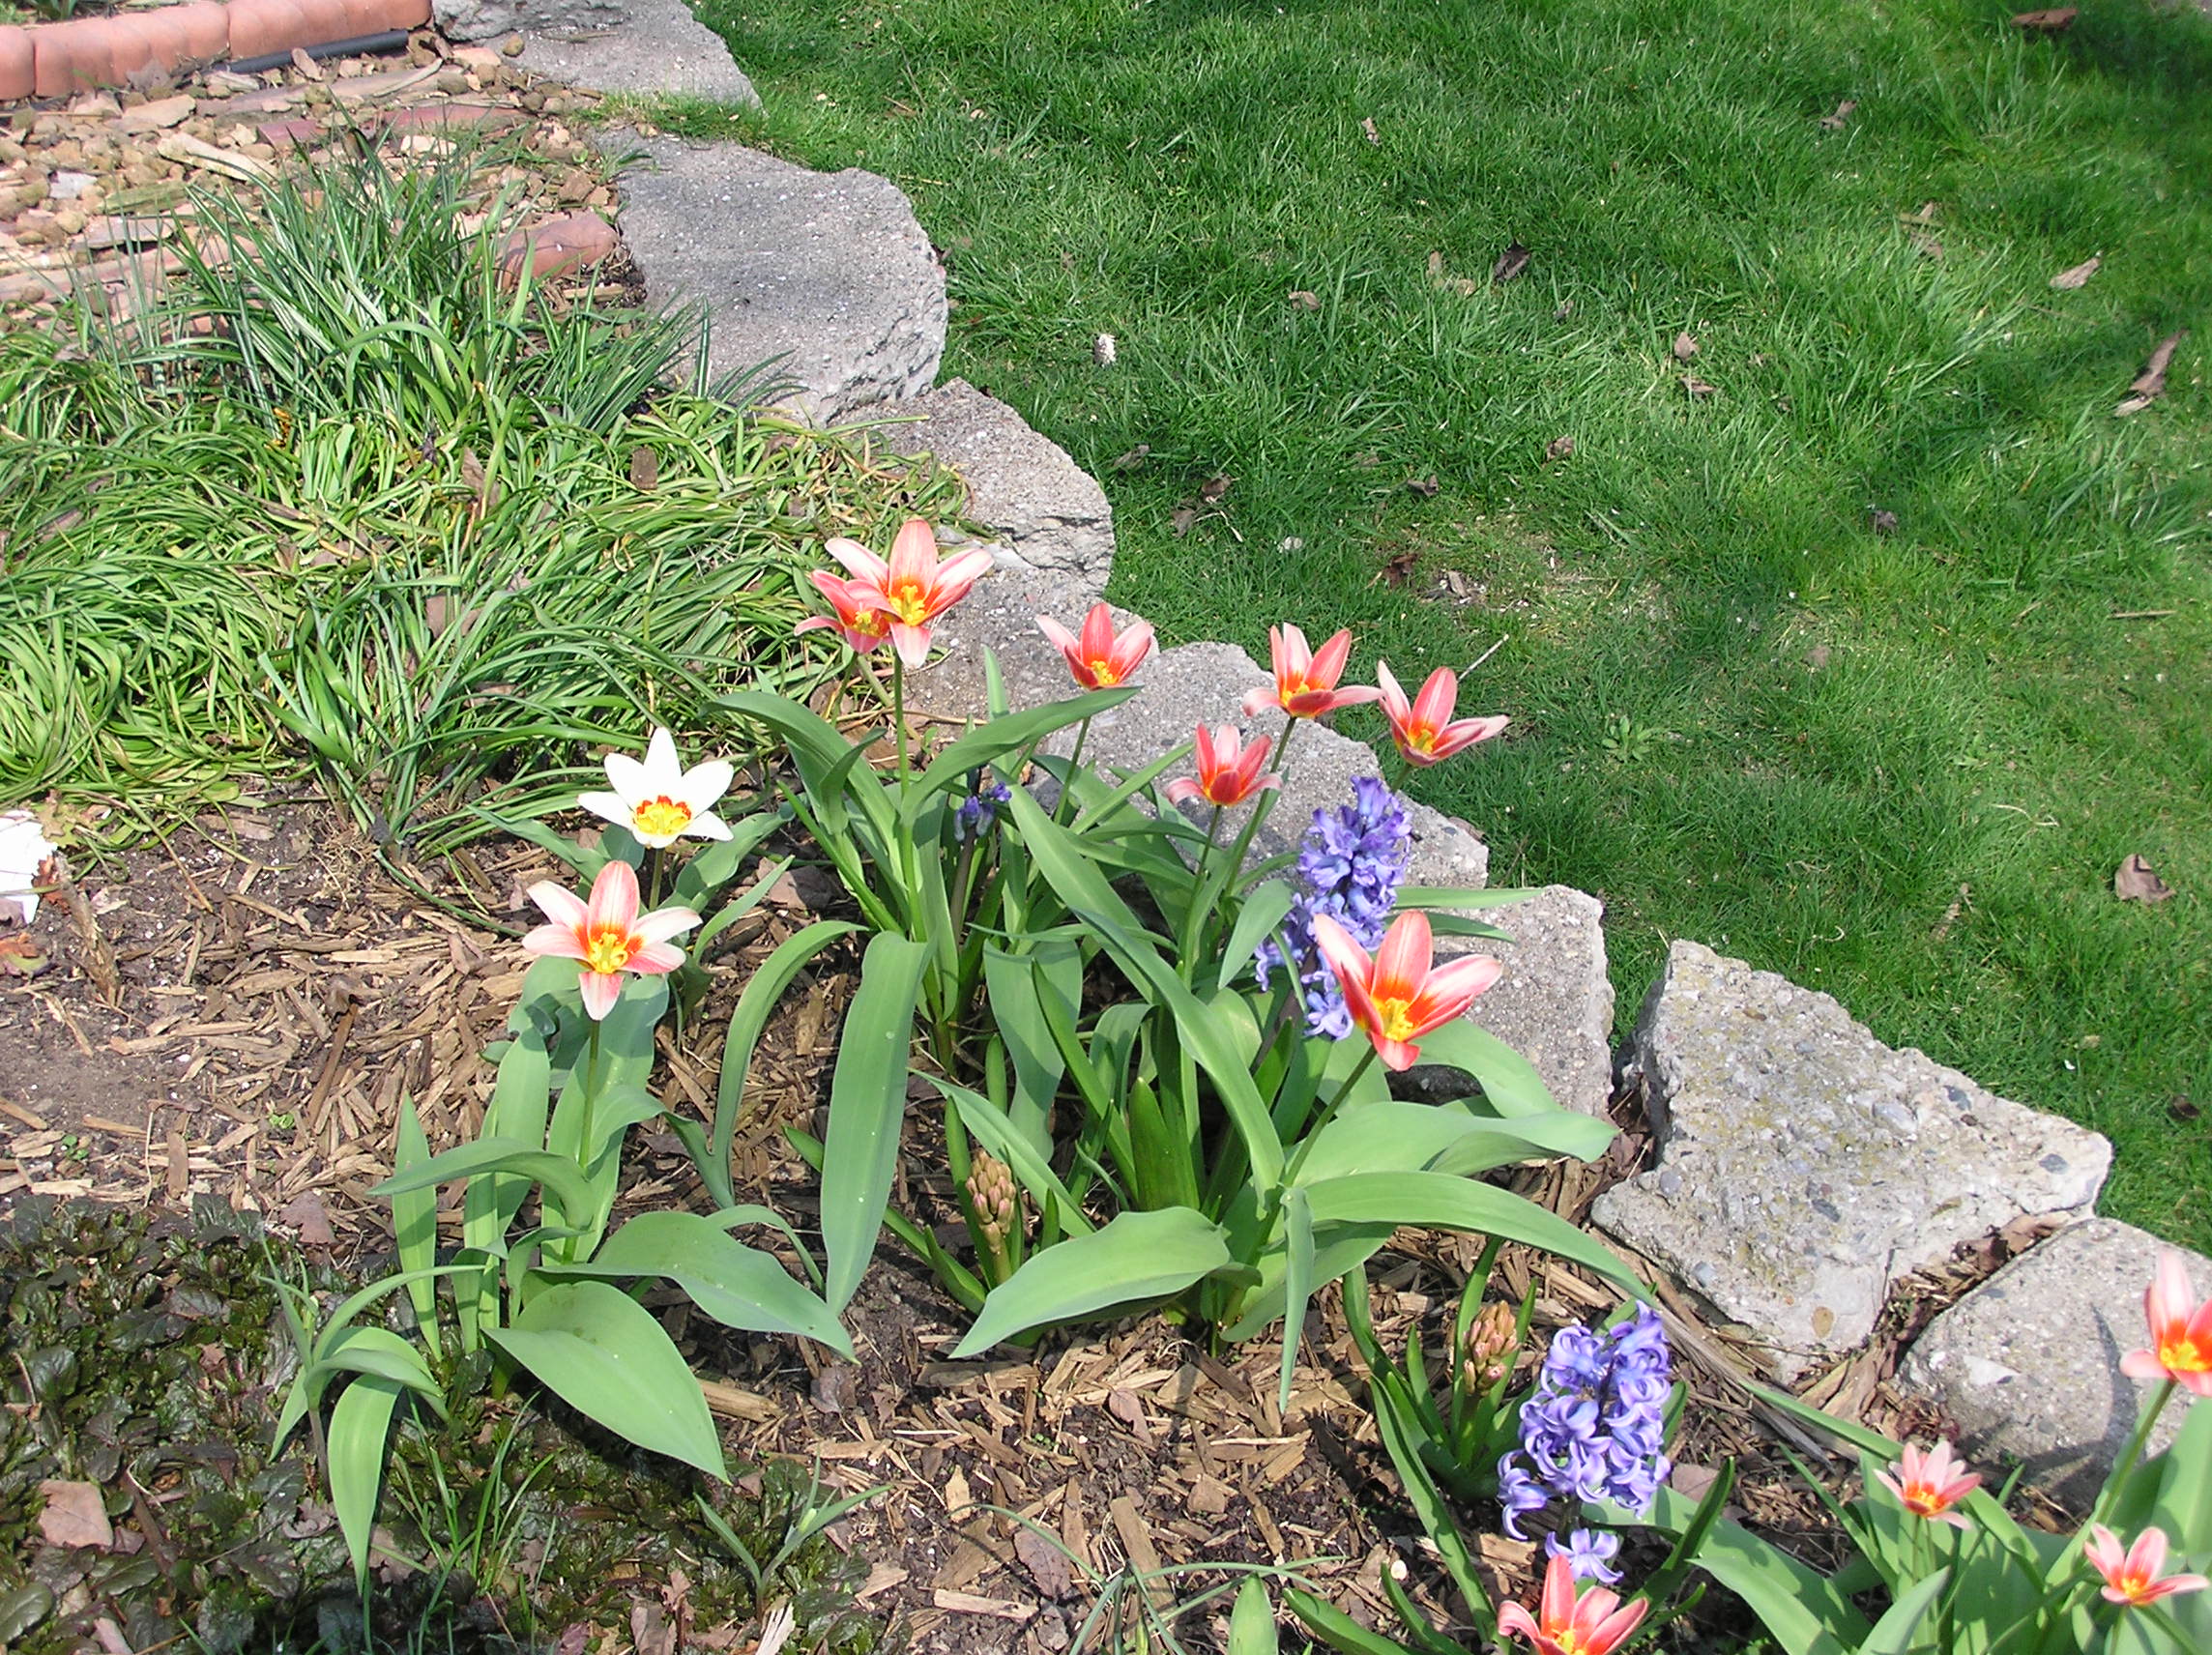 4/17   Early tulips getting old, newly blooming hyacinth.